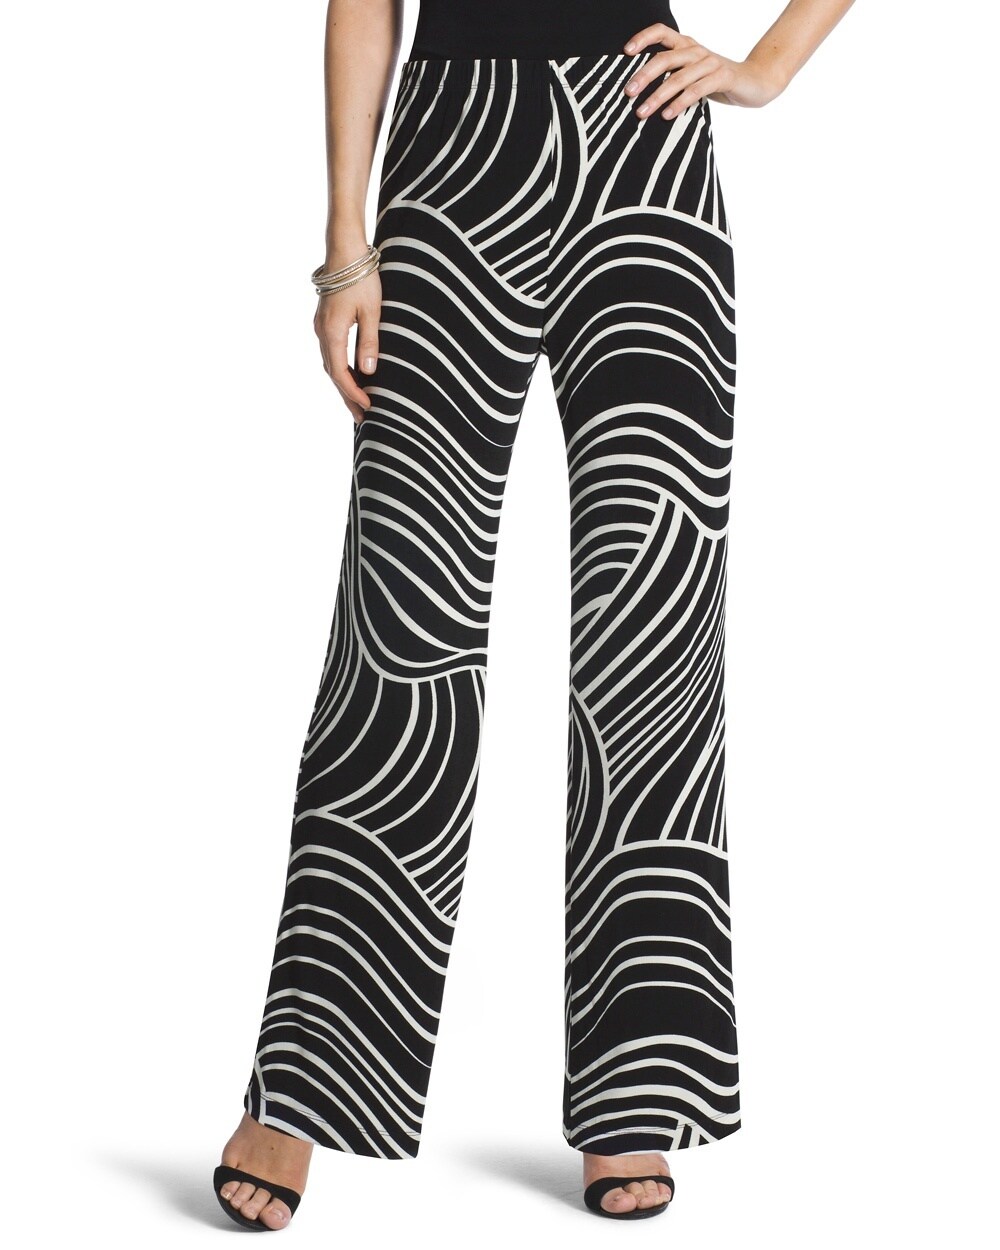 Travelers Classic Black-and-White Pants